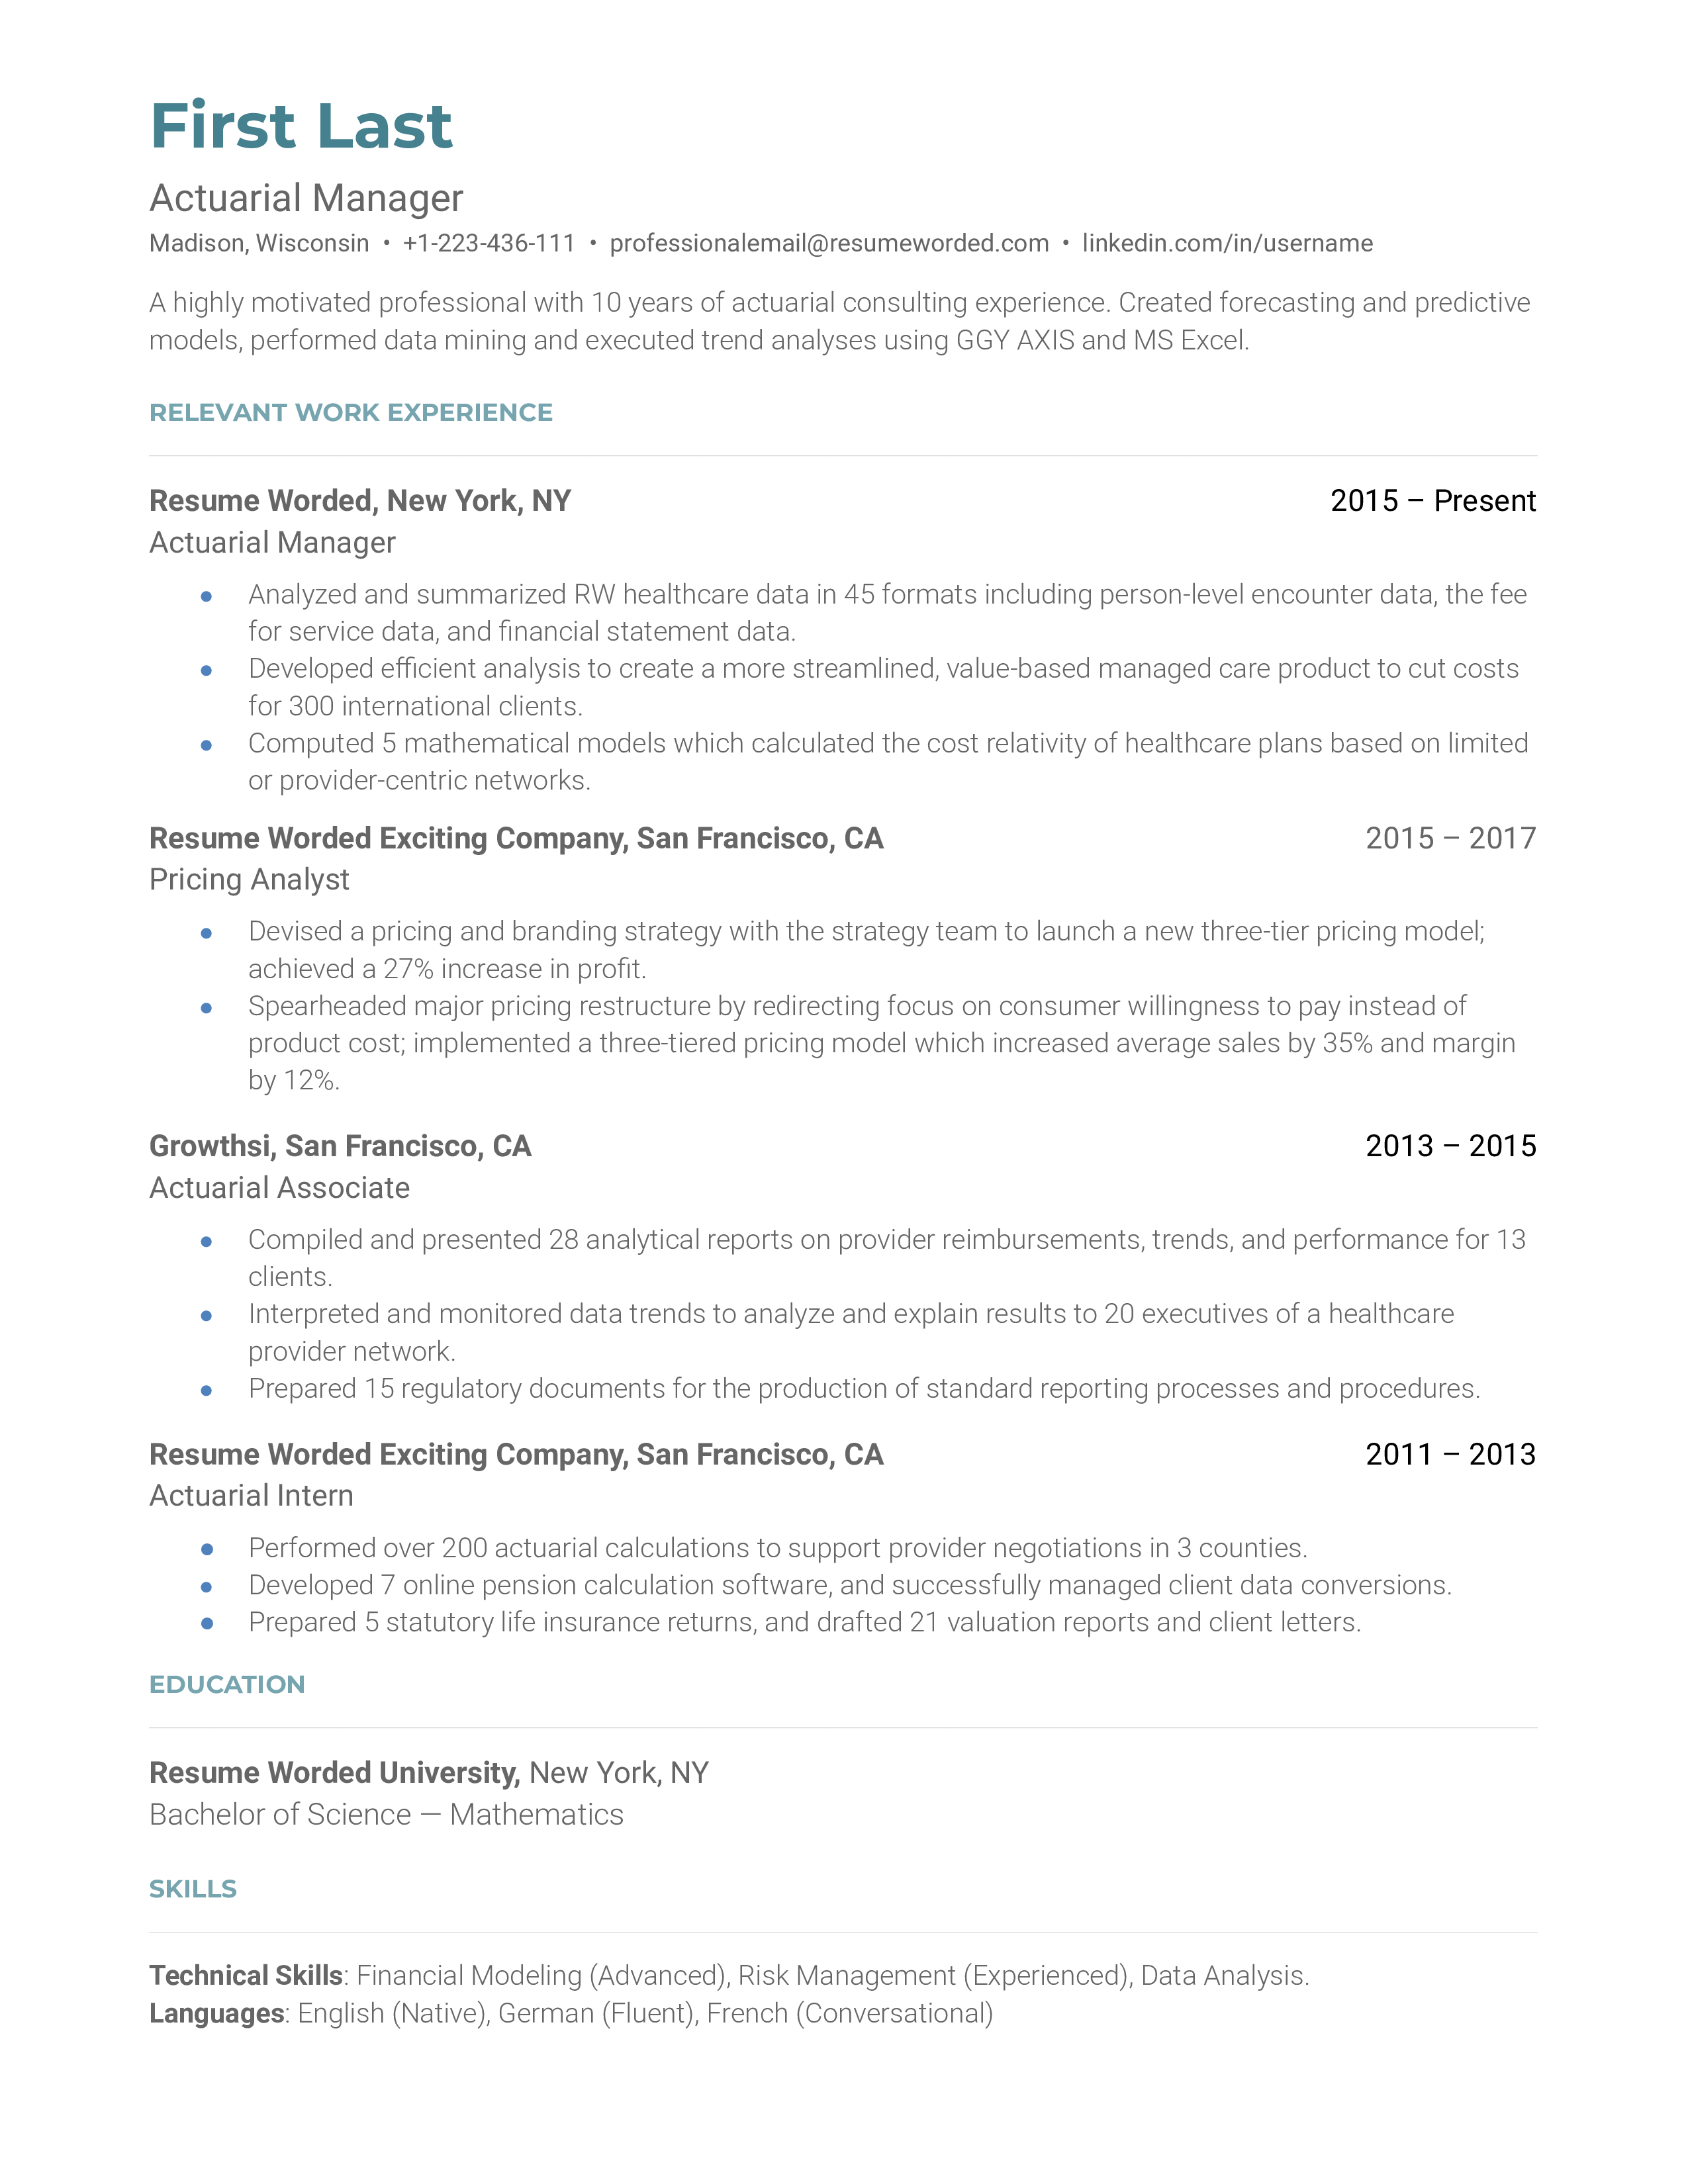 An actuarial manager resume template that shows career progression and highlights communication skills